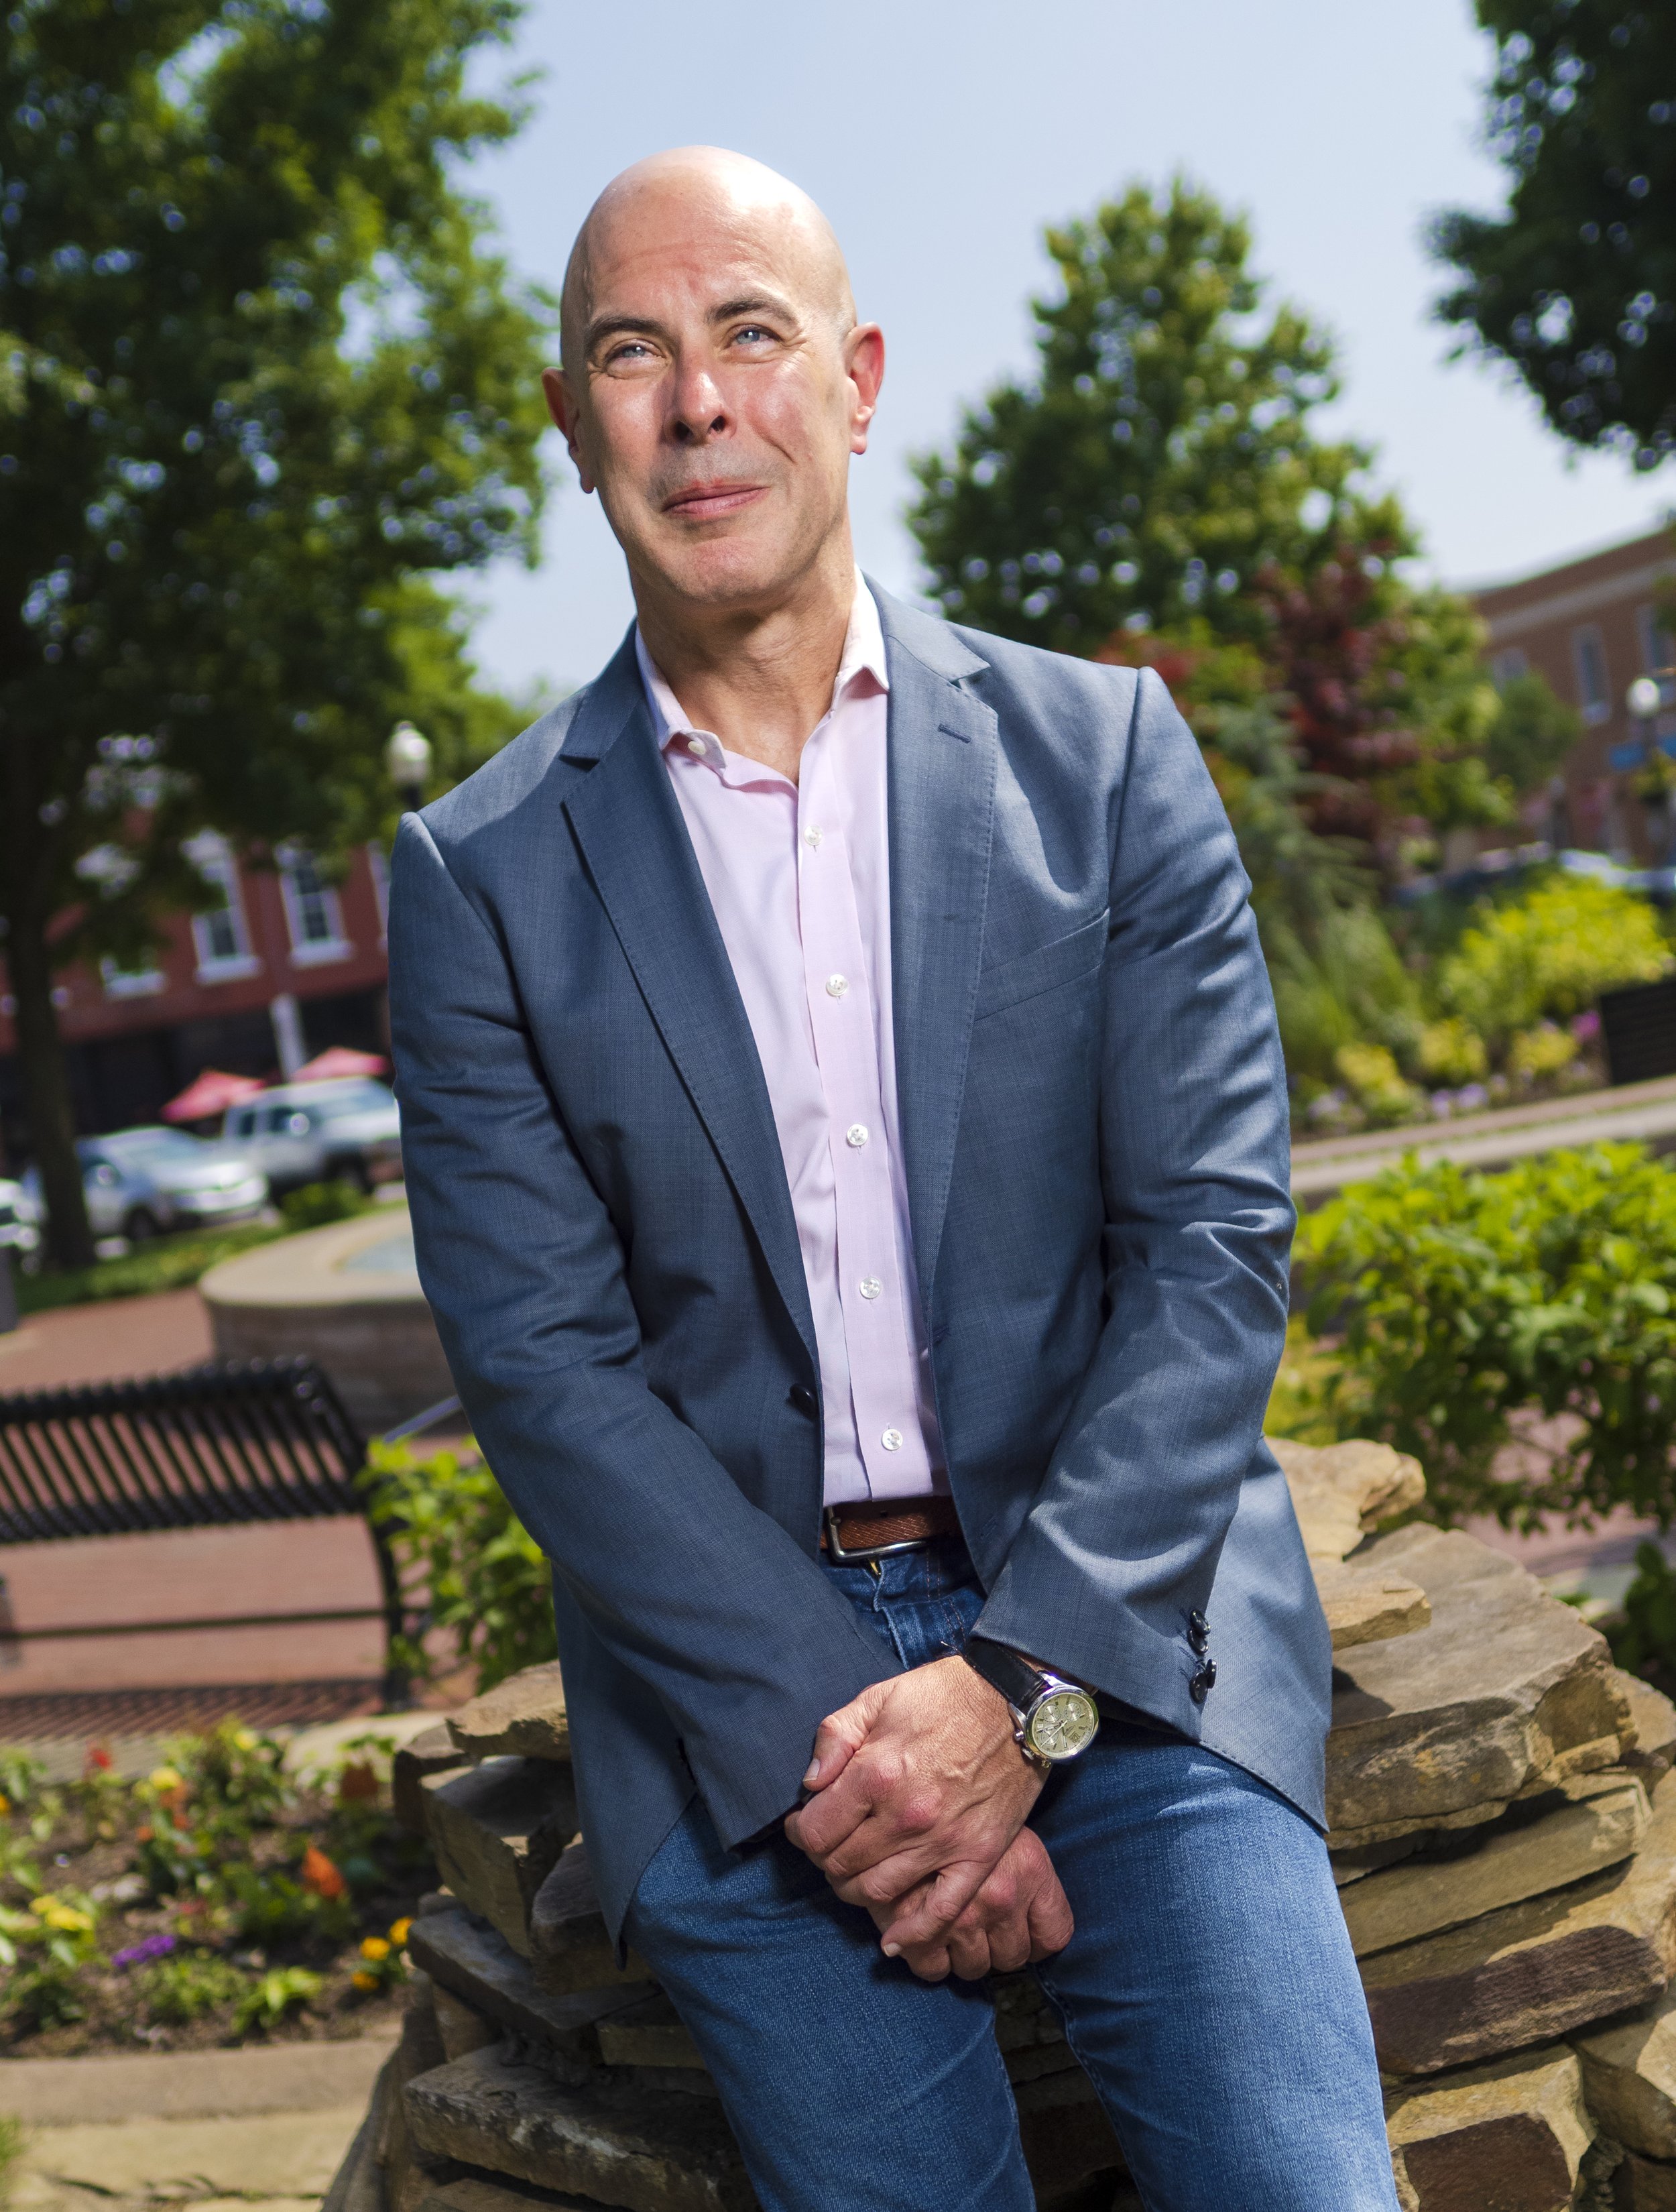  Robert Burns, director of the Home Region Group at the Walton Family Foundation, poses for a portrait at the downtown square in Bentonville, Monday, May 22, 2023.  